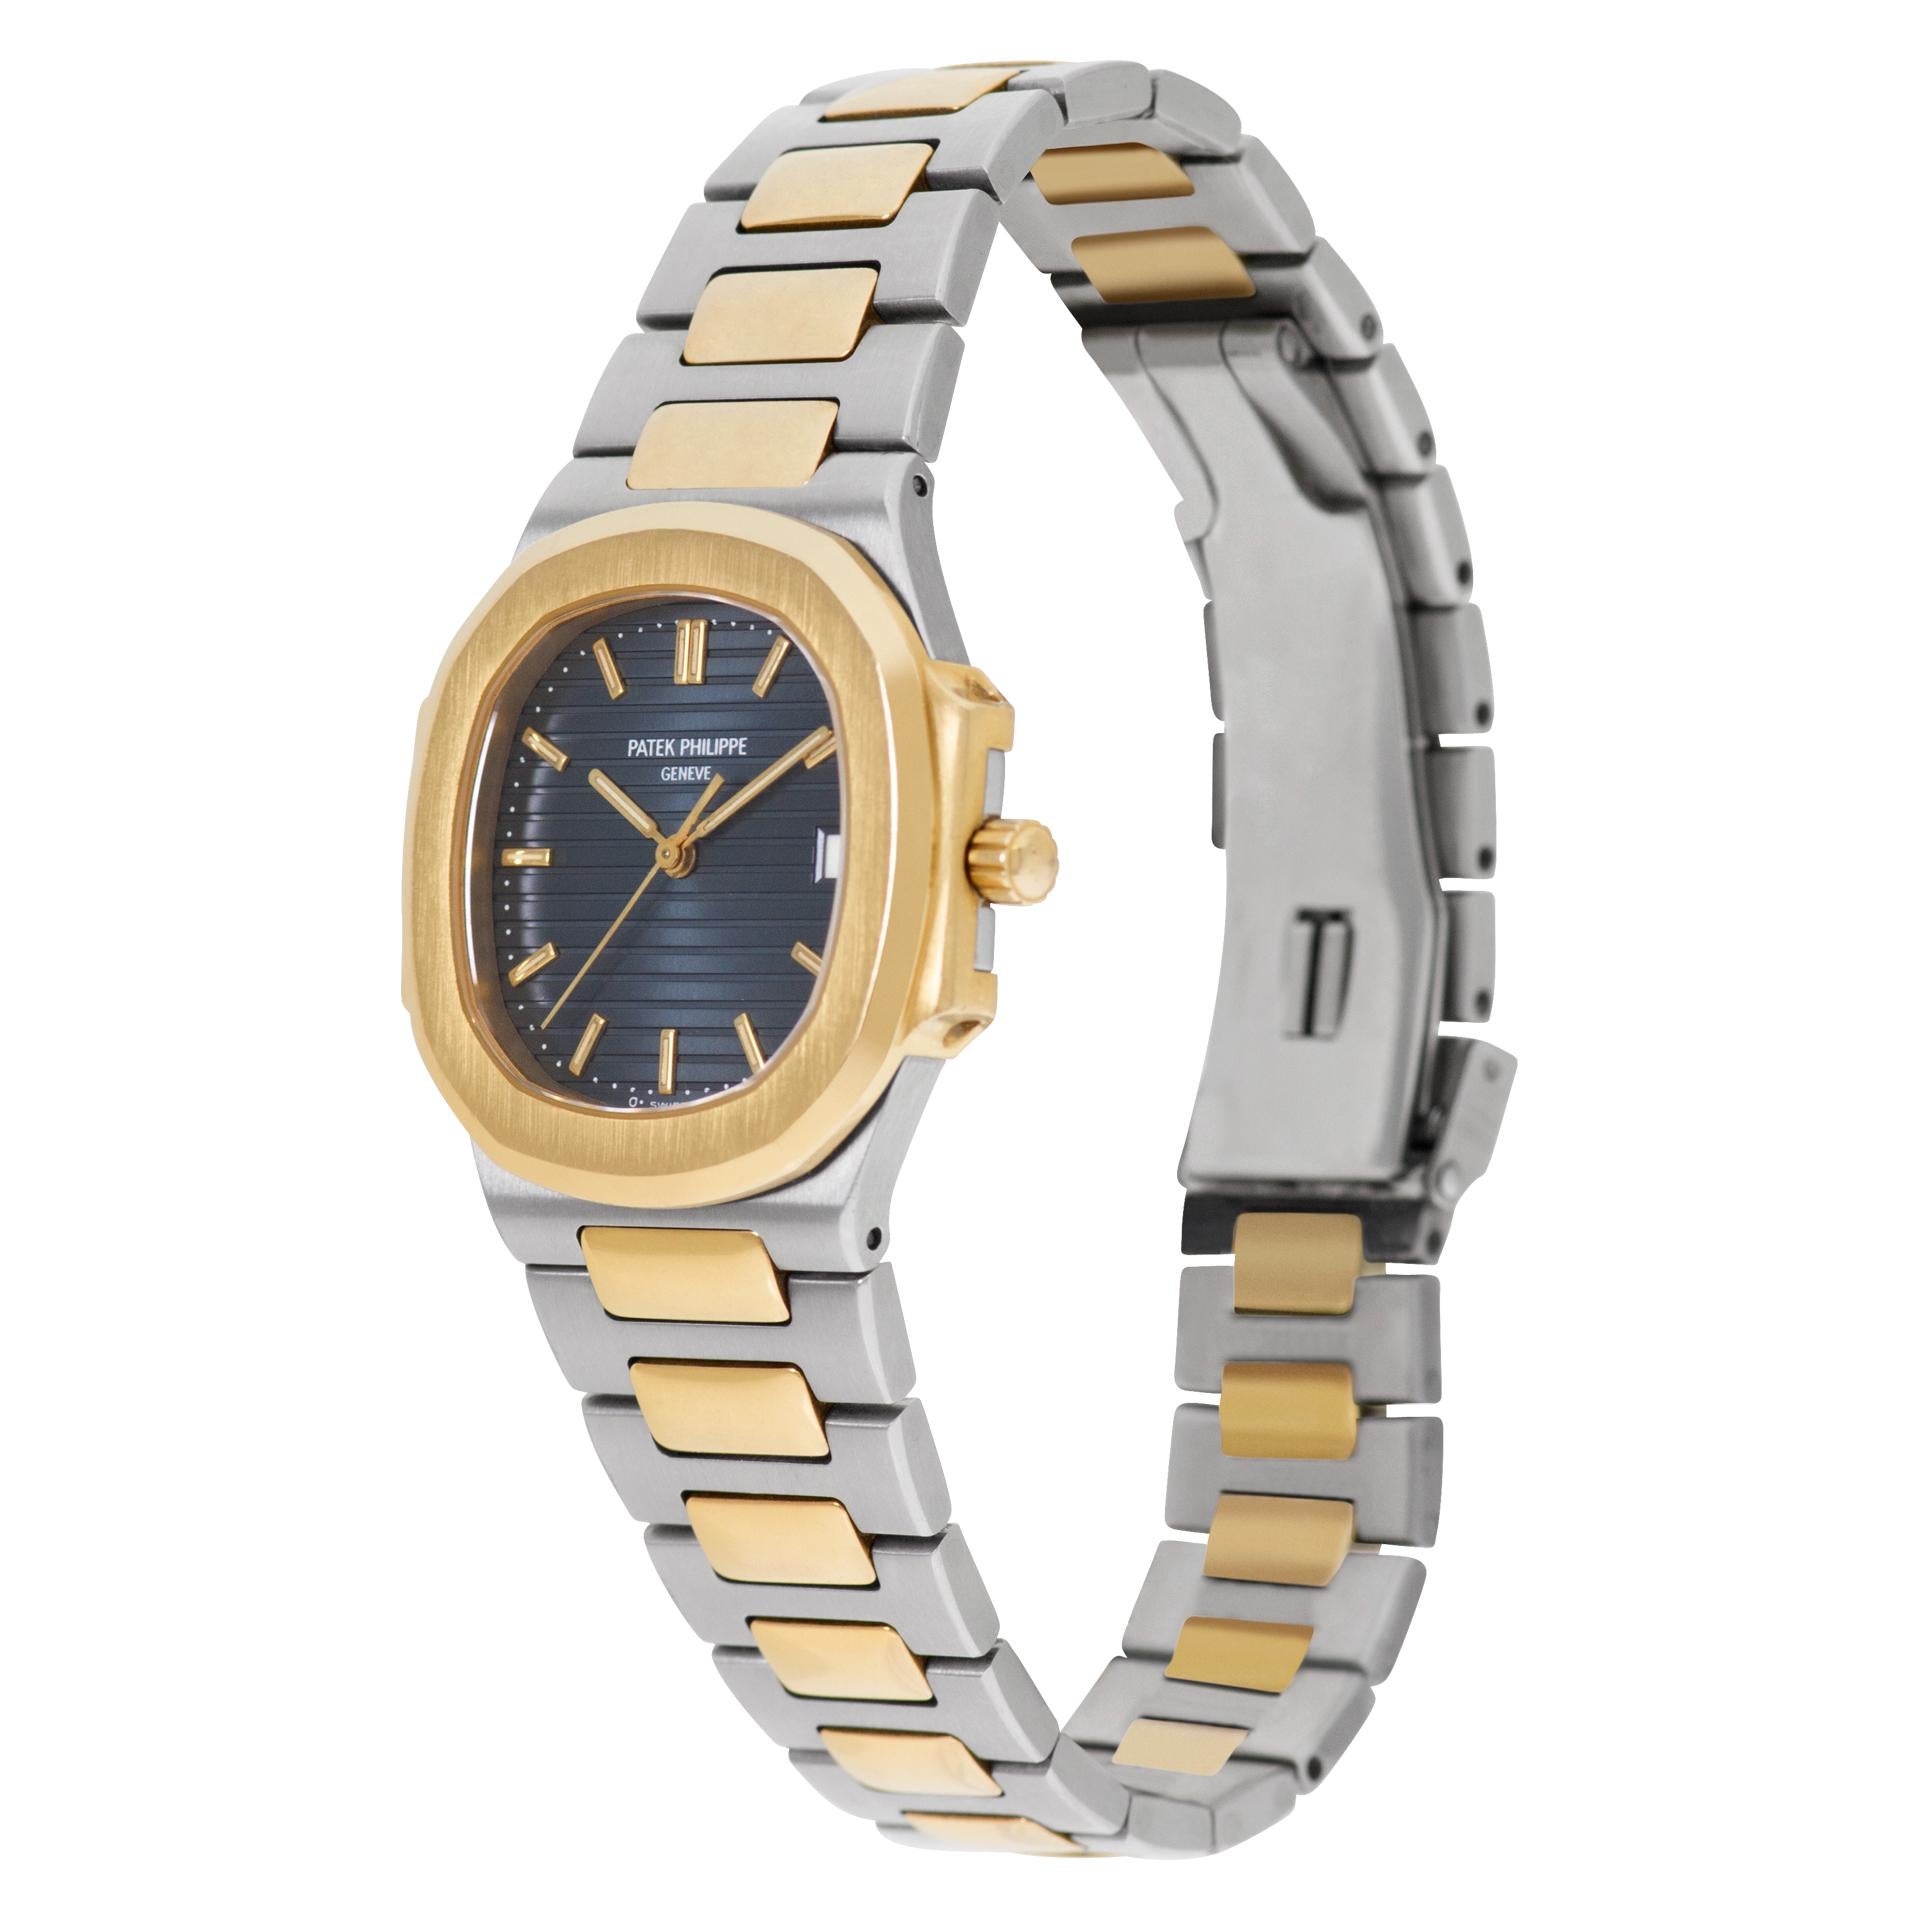 Patek Philippe Nautilus in 18k & stainless steel. Quartz w/ sweep seconds and date. 33 mm case size. Ref 3900. Fine Pre-owned Patek Philippe Watch.

 Certified preowned Sport Patek Philippe Nautilus 3900 watch is made out of Stainless steel on a 18k